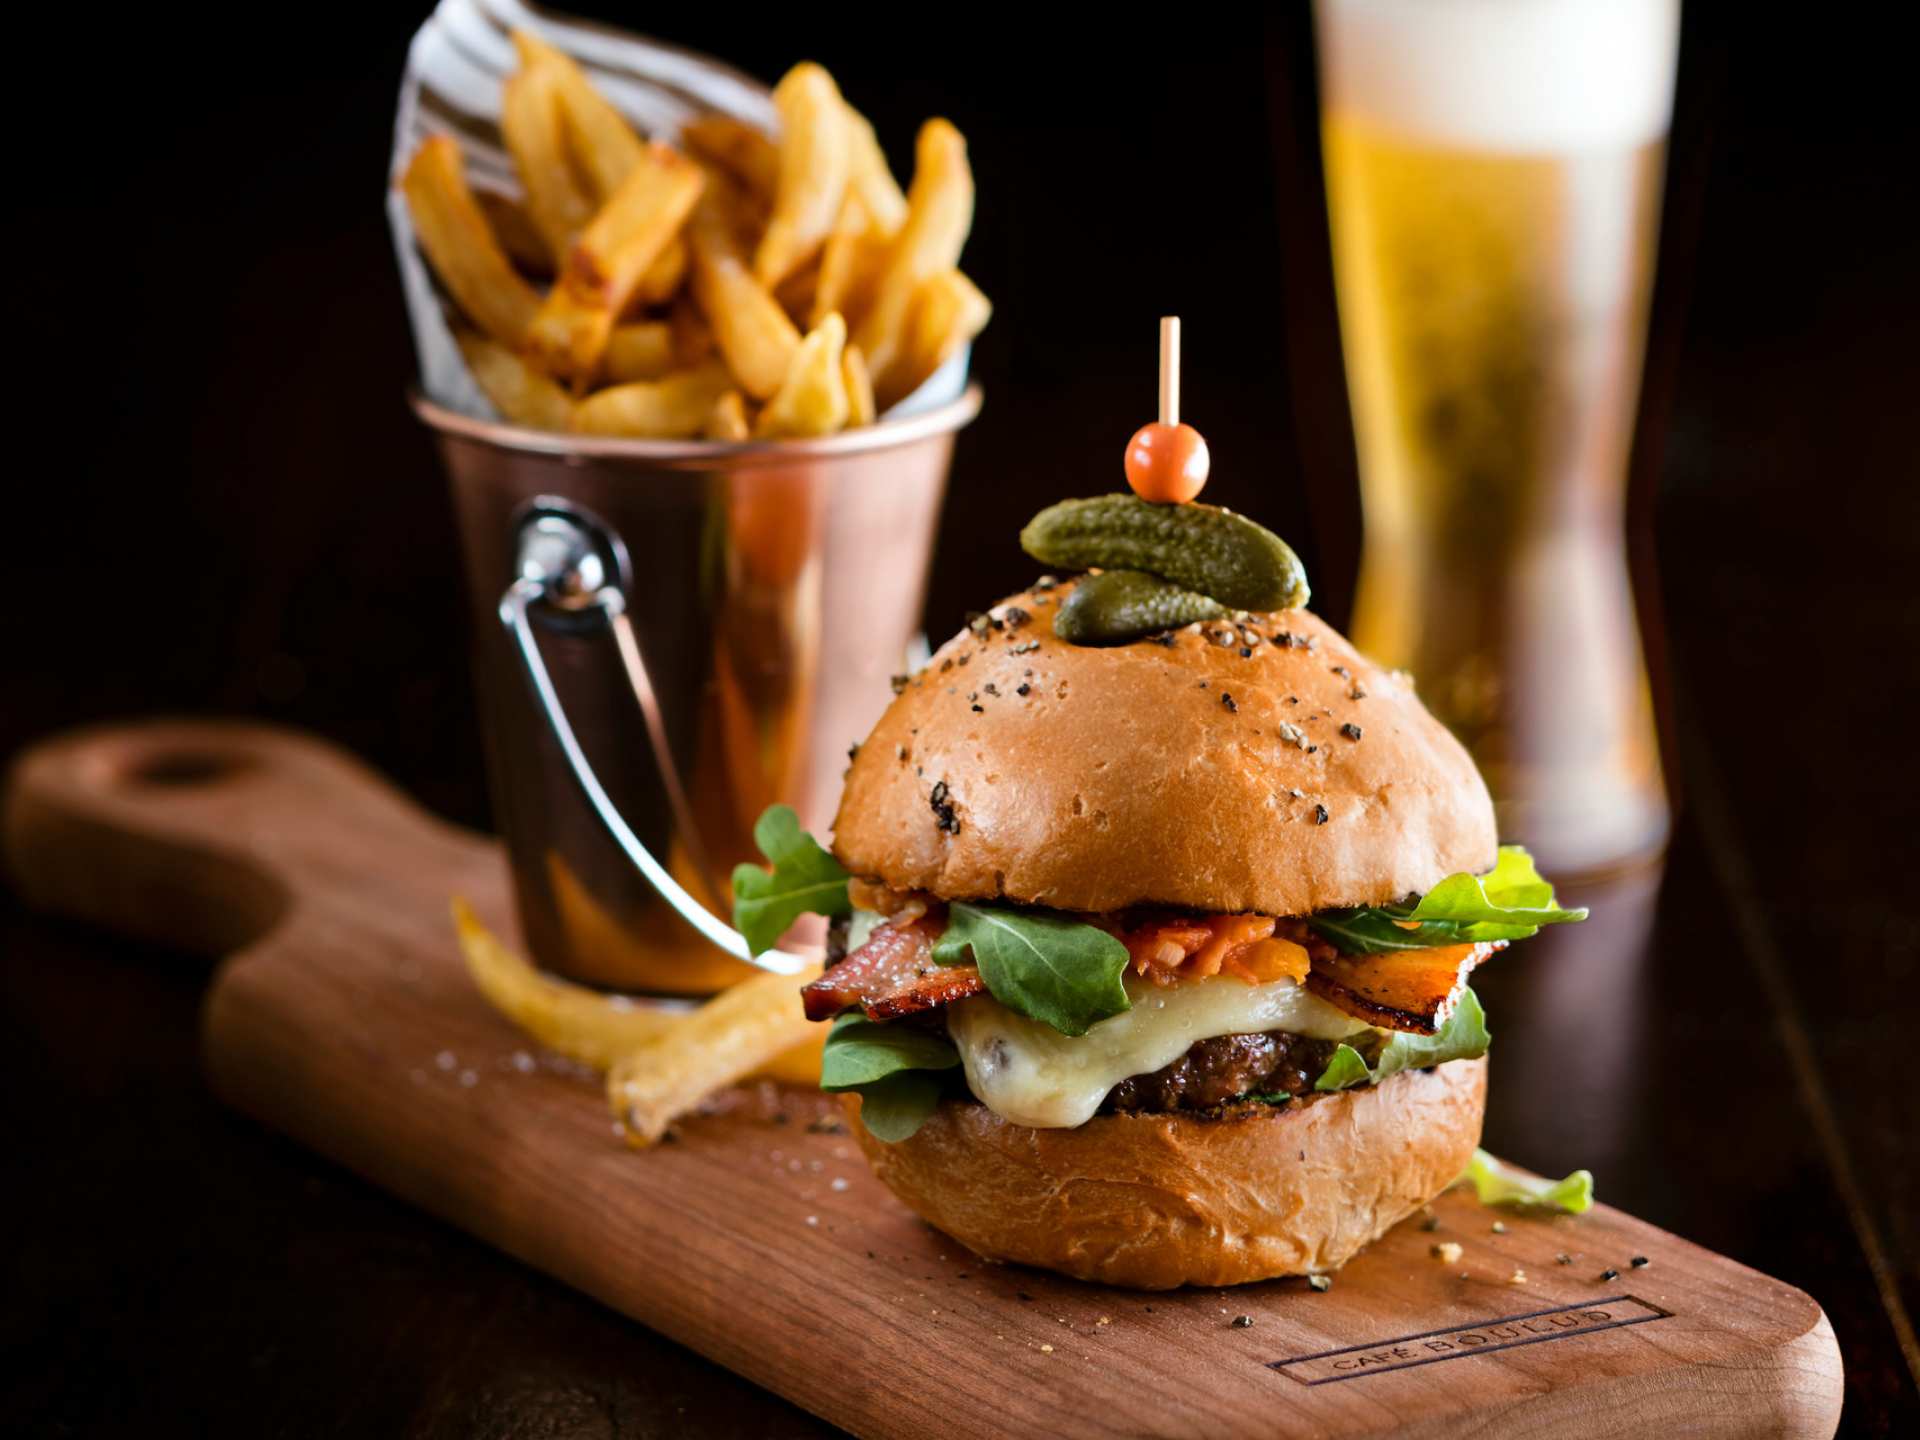 Best restaurants in Yorkville | Gourmet burger and fries at Cafe Boulud